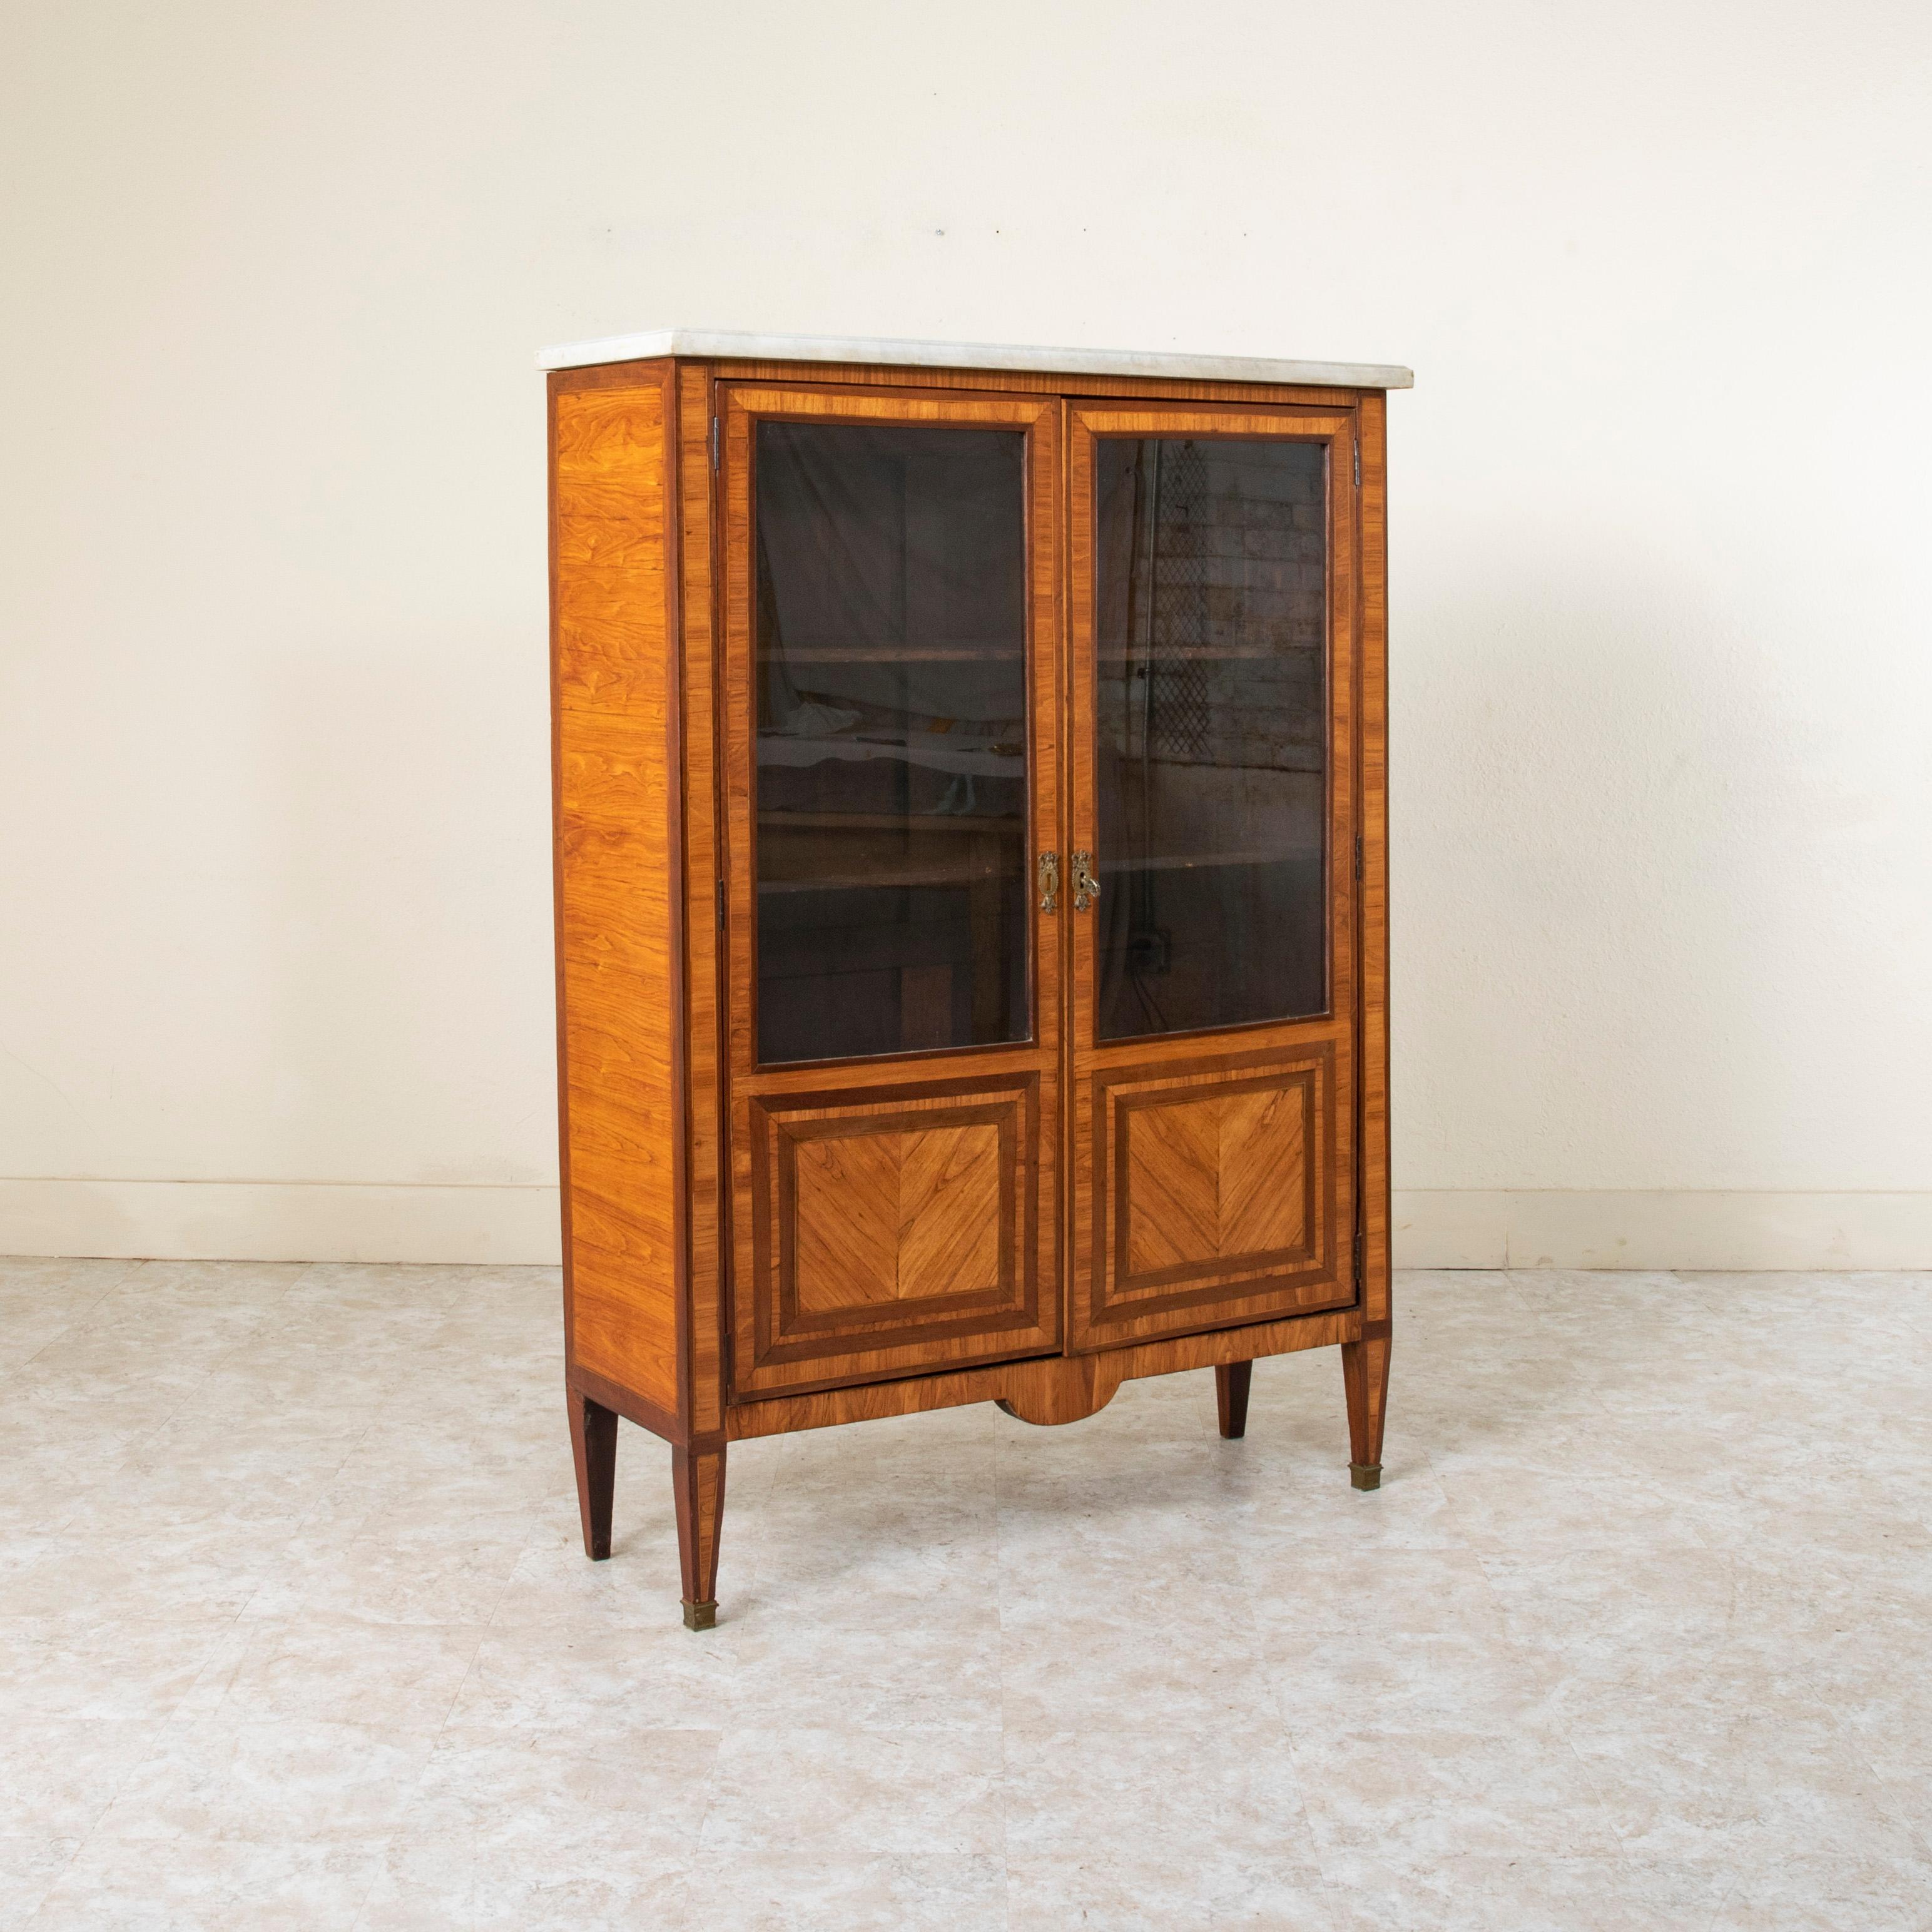 This small scale late eighteenth century Louis XVI period walnut marquetry vitrine or bookcase features rosewood borders on each side with fine lines of lemon wood inlay forming inset borders. Its two glass doors are fitted with book matched walnut